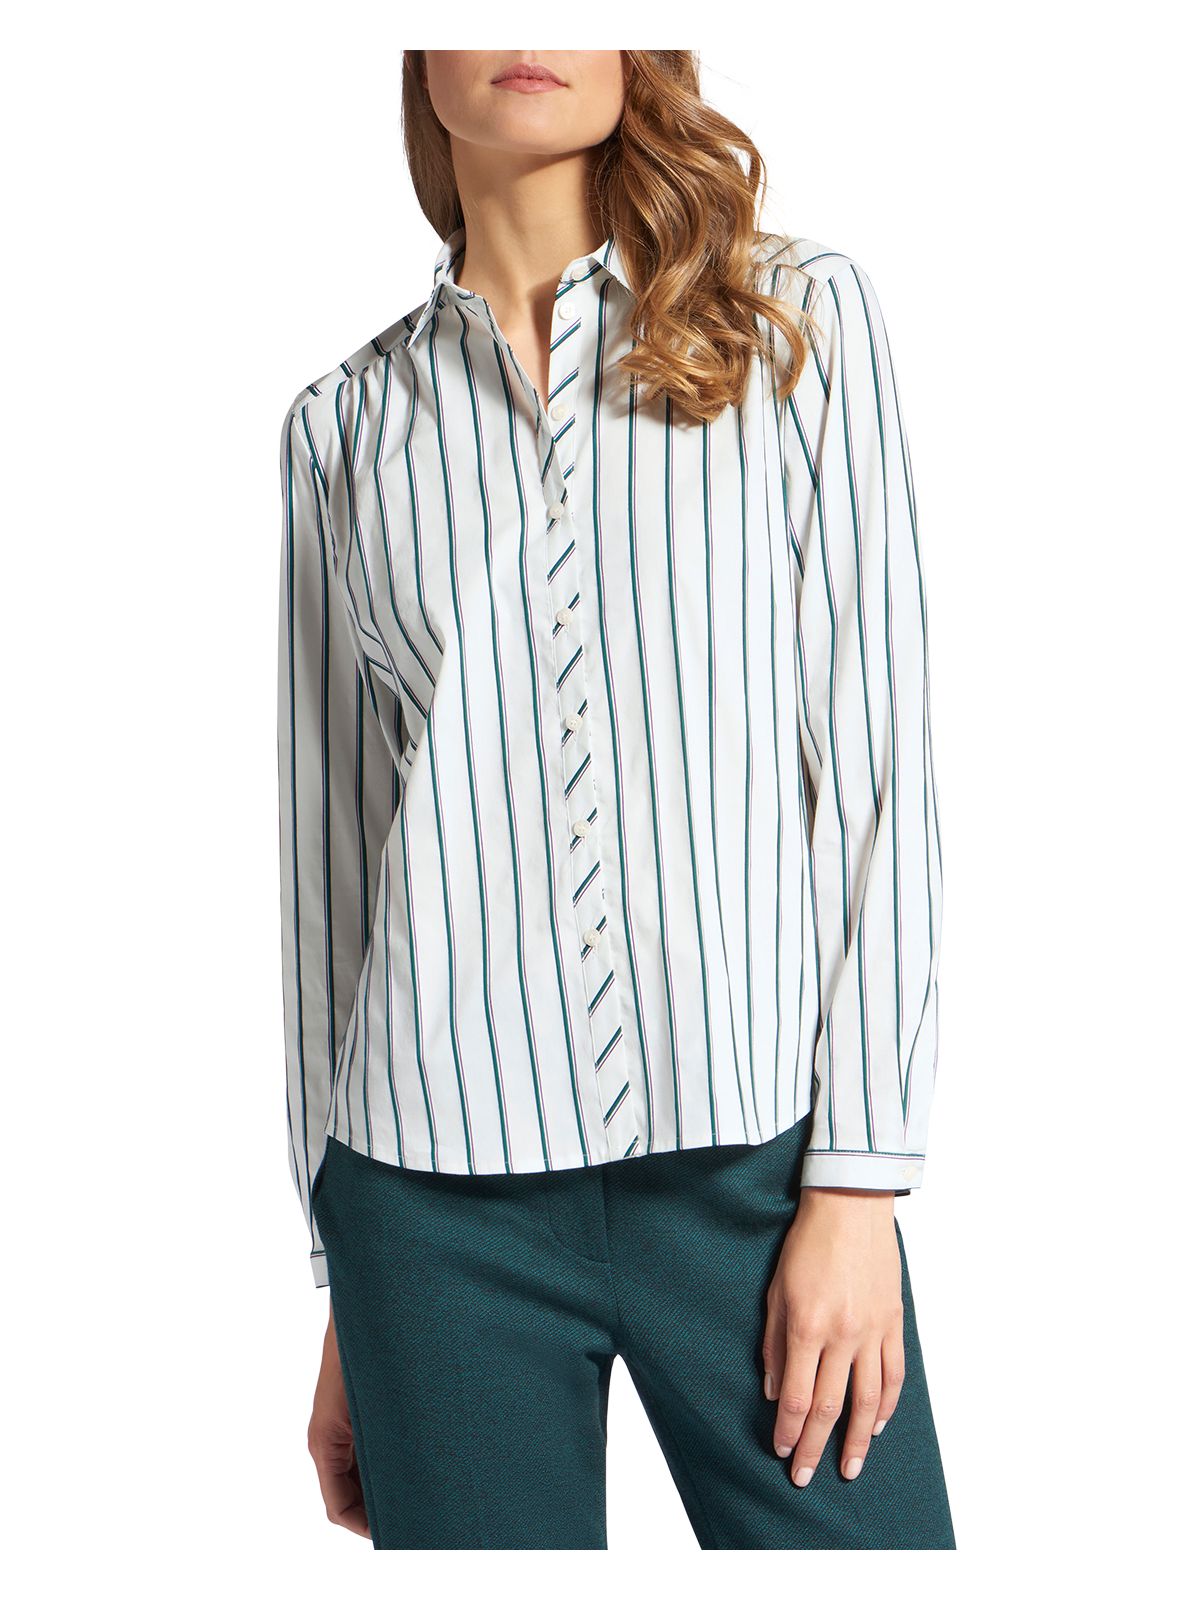 BASLER Womens White Striped Cuffed Collared Button Up Top Size: 12